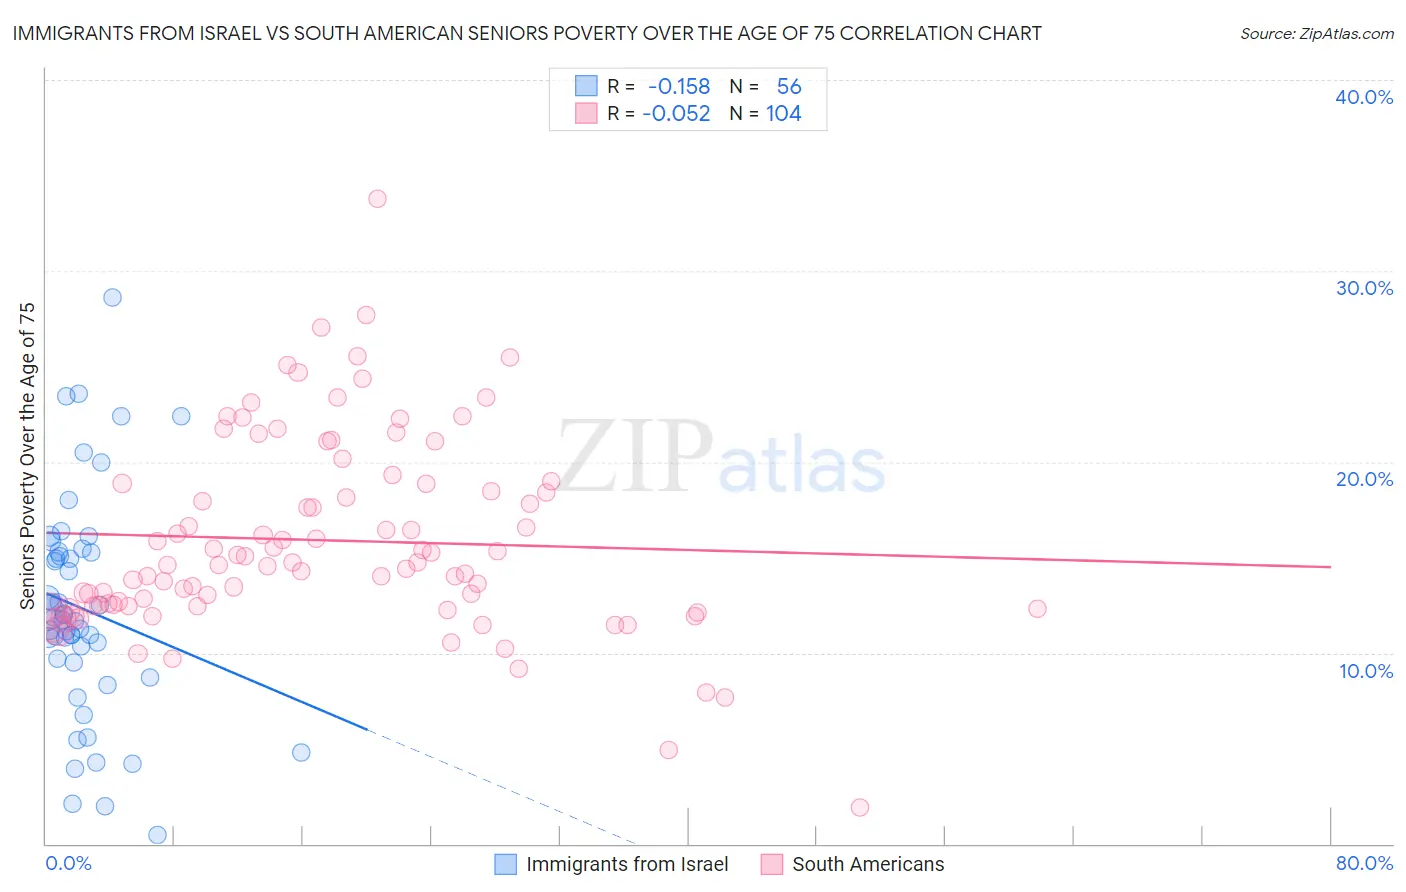 Immigrants from Israel vs South American Seniors Poverty Over the Age of 75